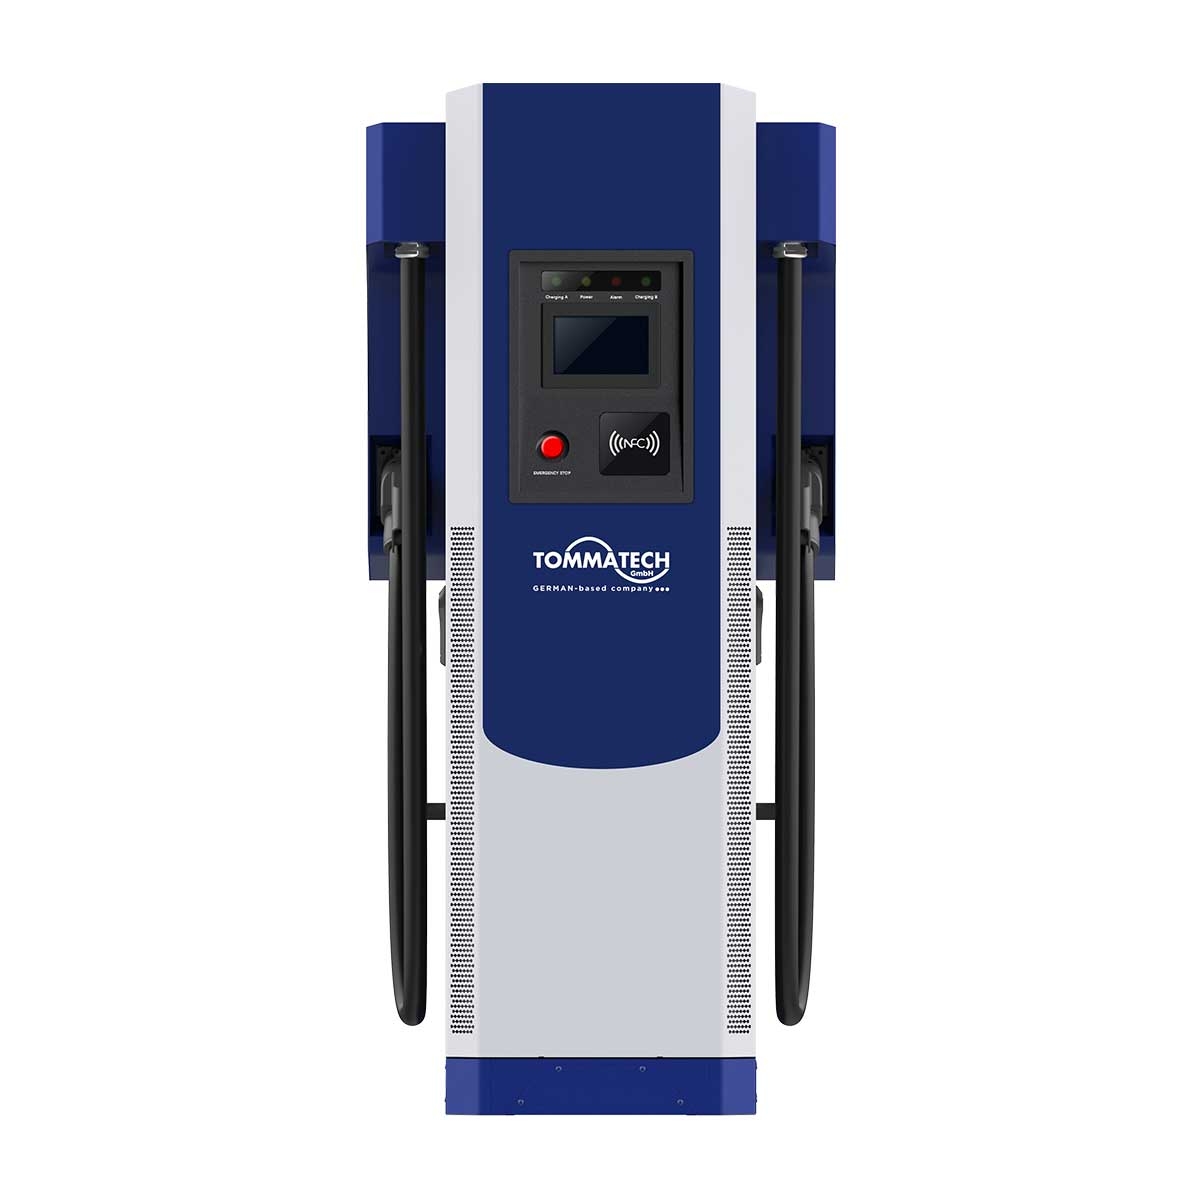 TommaTech Commercial 90kW DC Electric Vehicle Charging Station